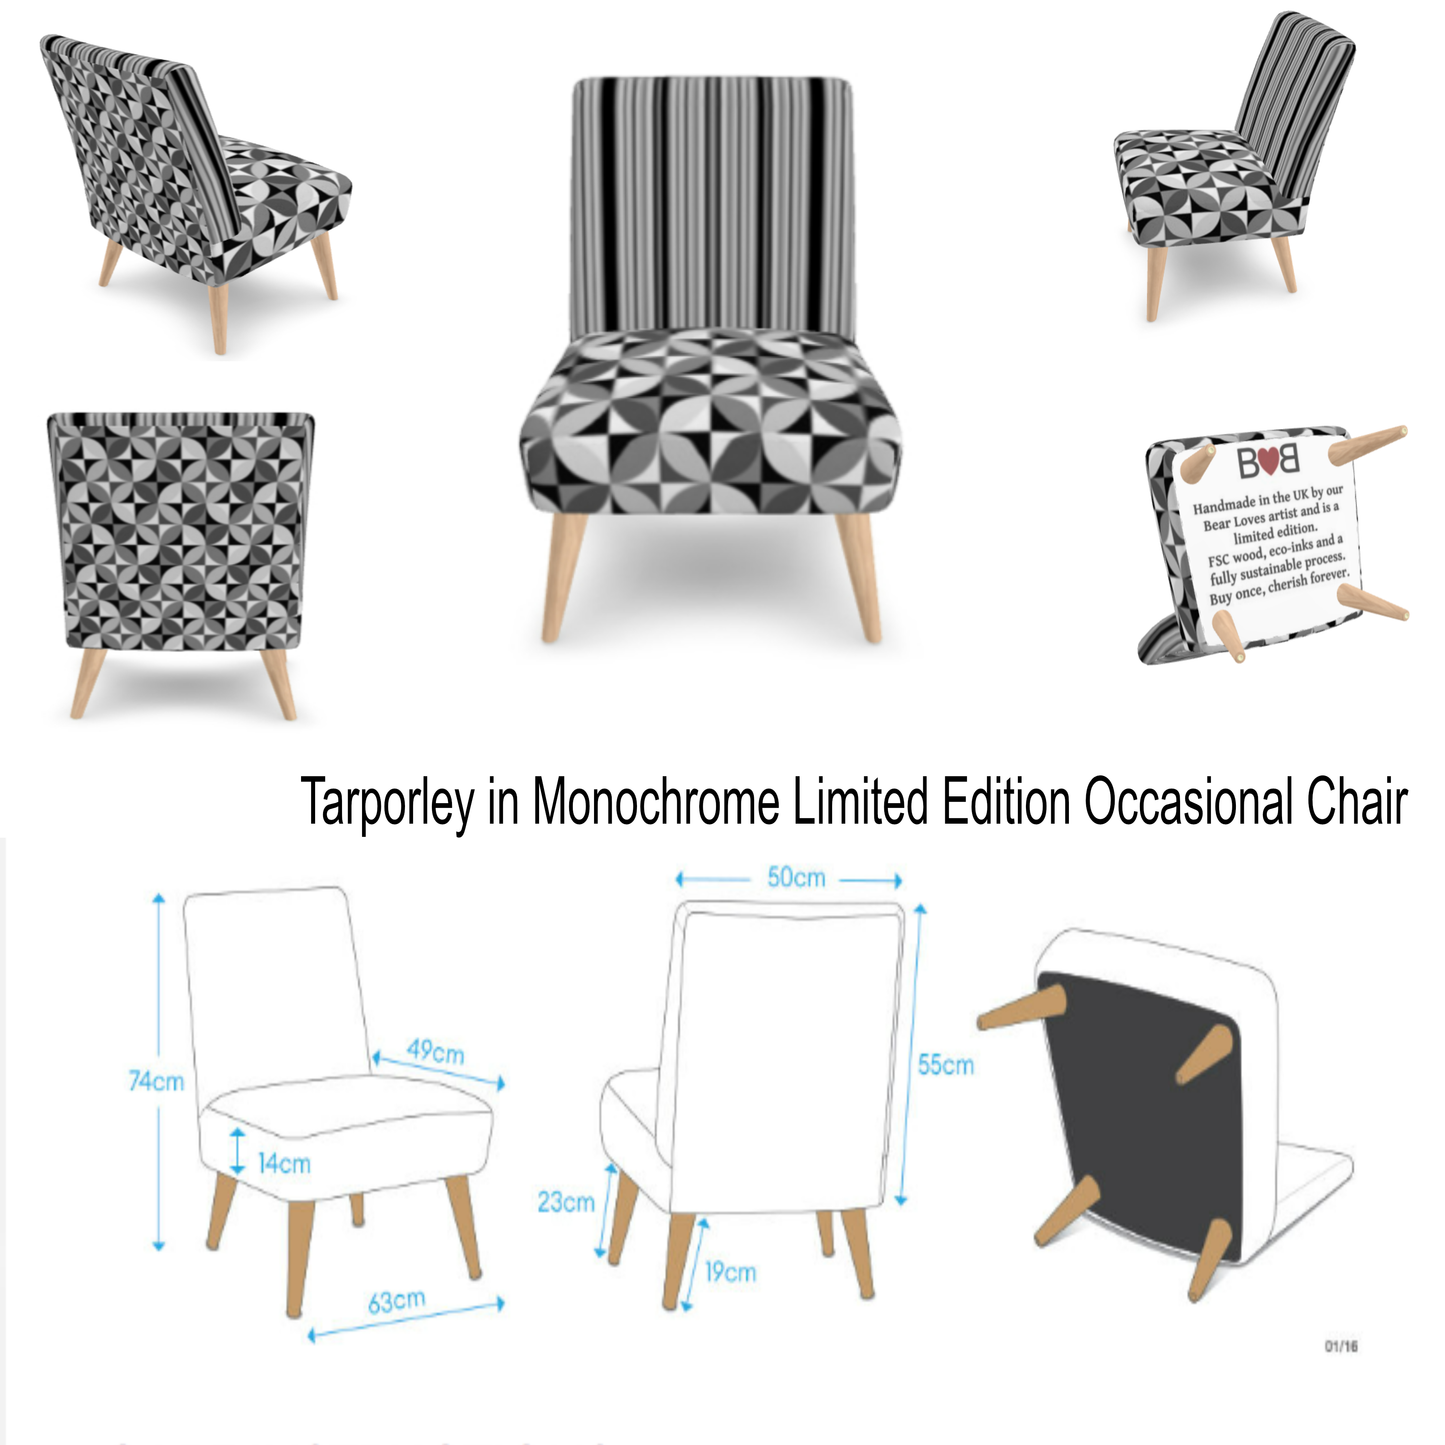 Tarporley in Monochrome, Limited Edition, Exclusively Designed Upholstered Occasional Chair